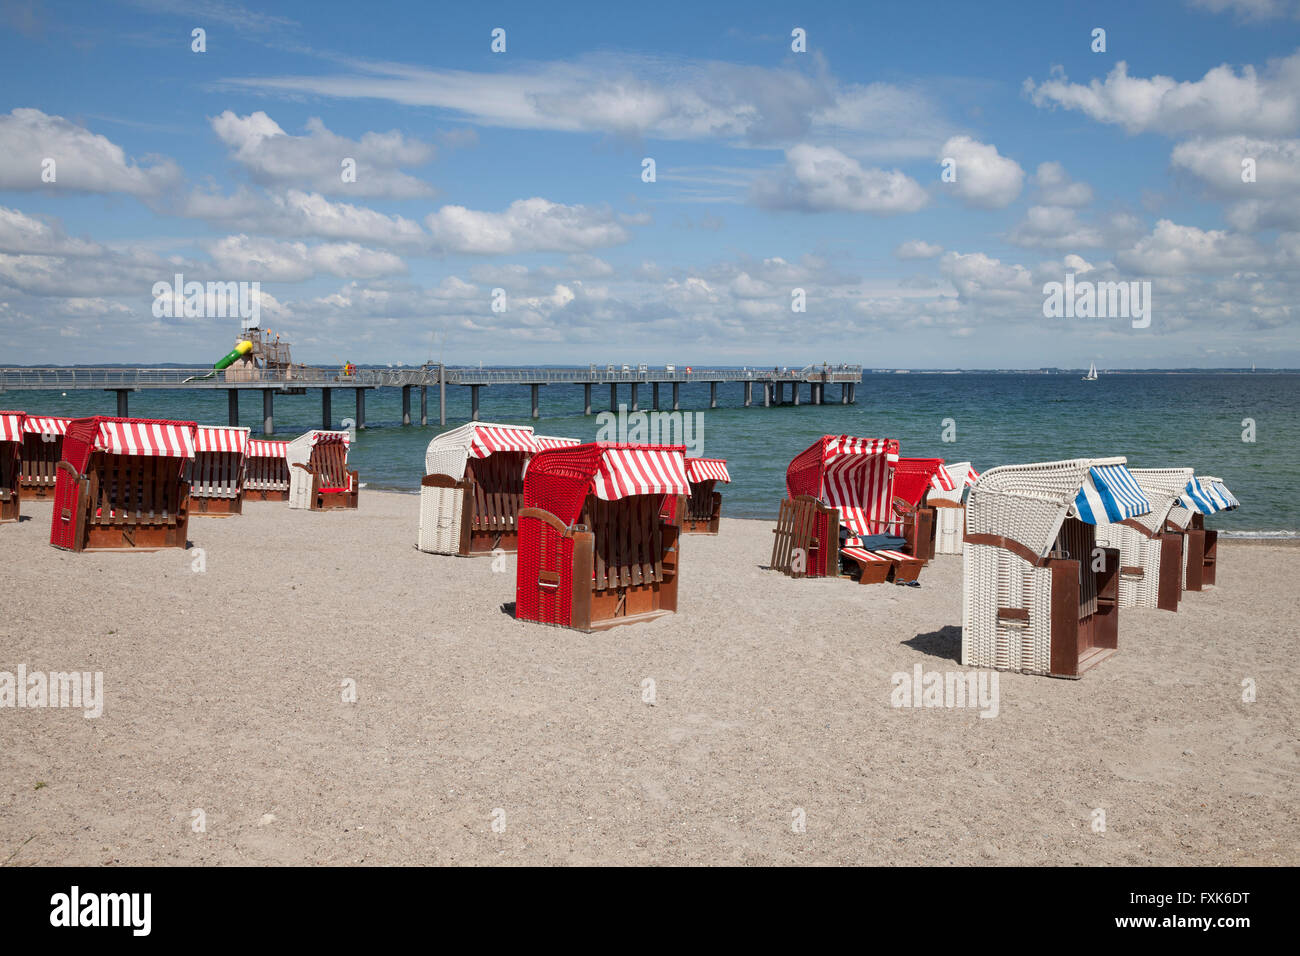 Timmendorfer beach with beach chairs and pier, Niendorf, Bay of Lübeck, Schleswig-Holstein, Germany Stock Photo